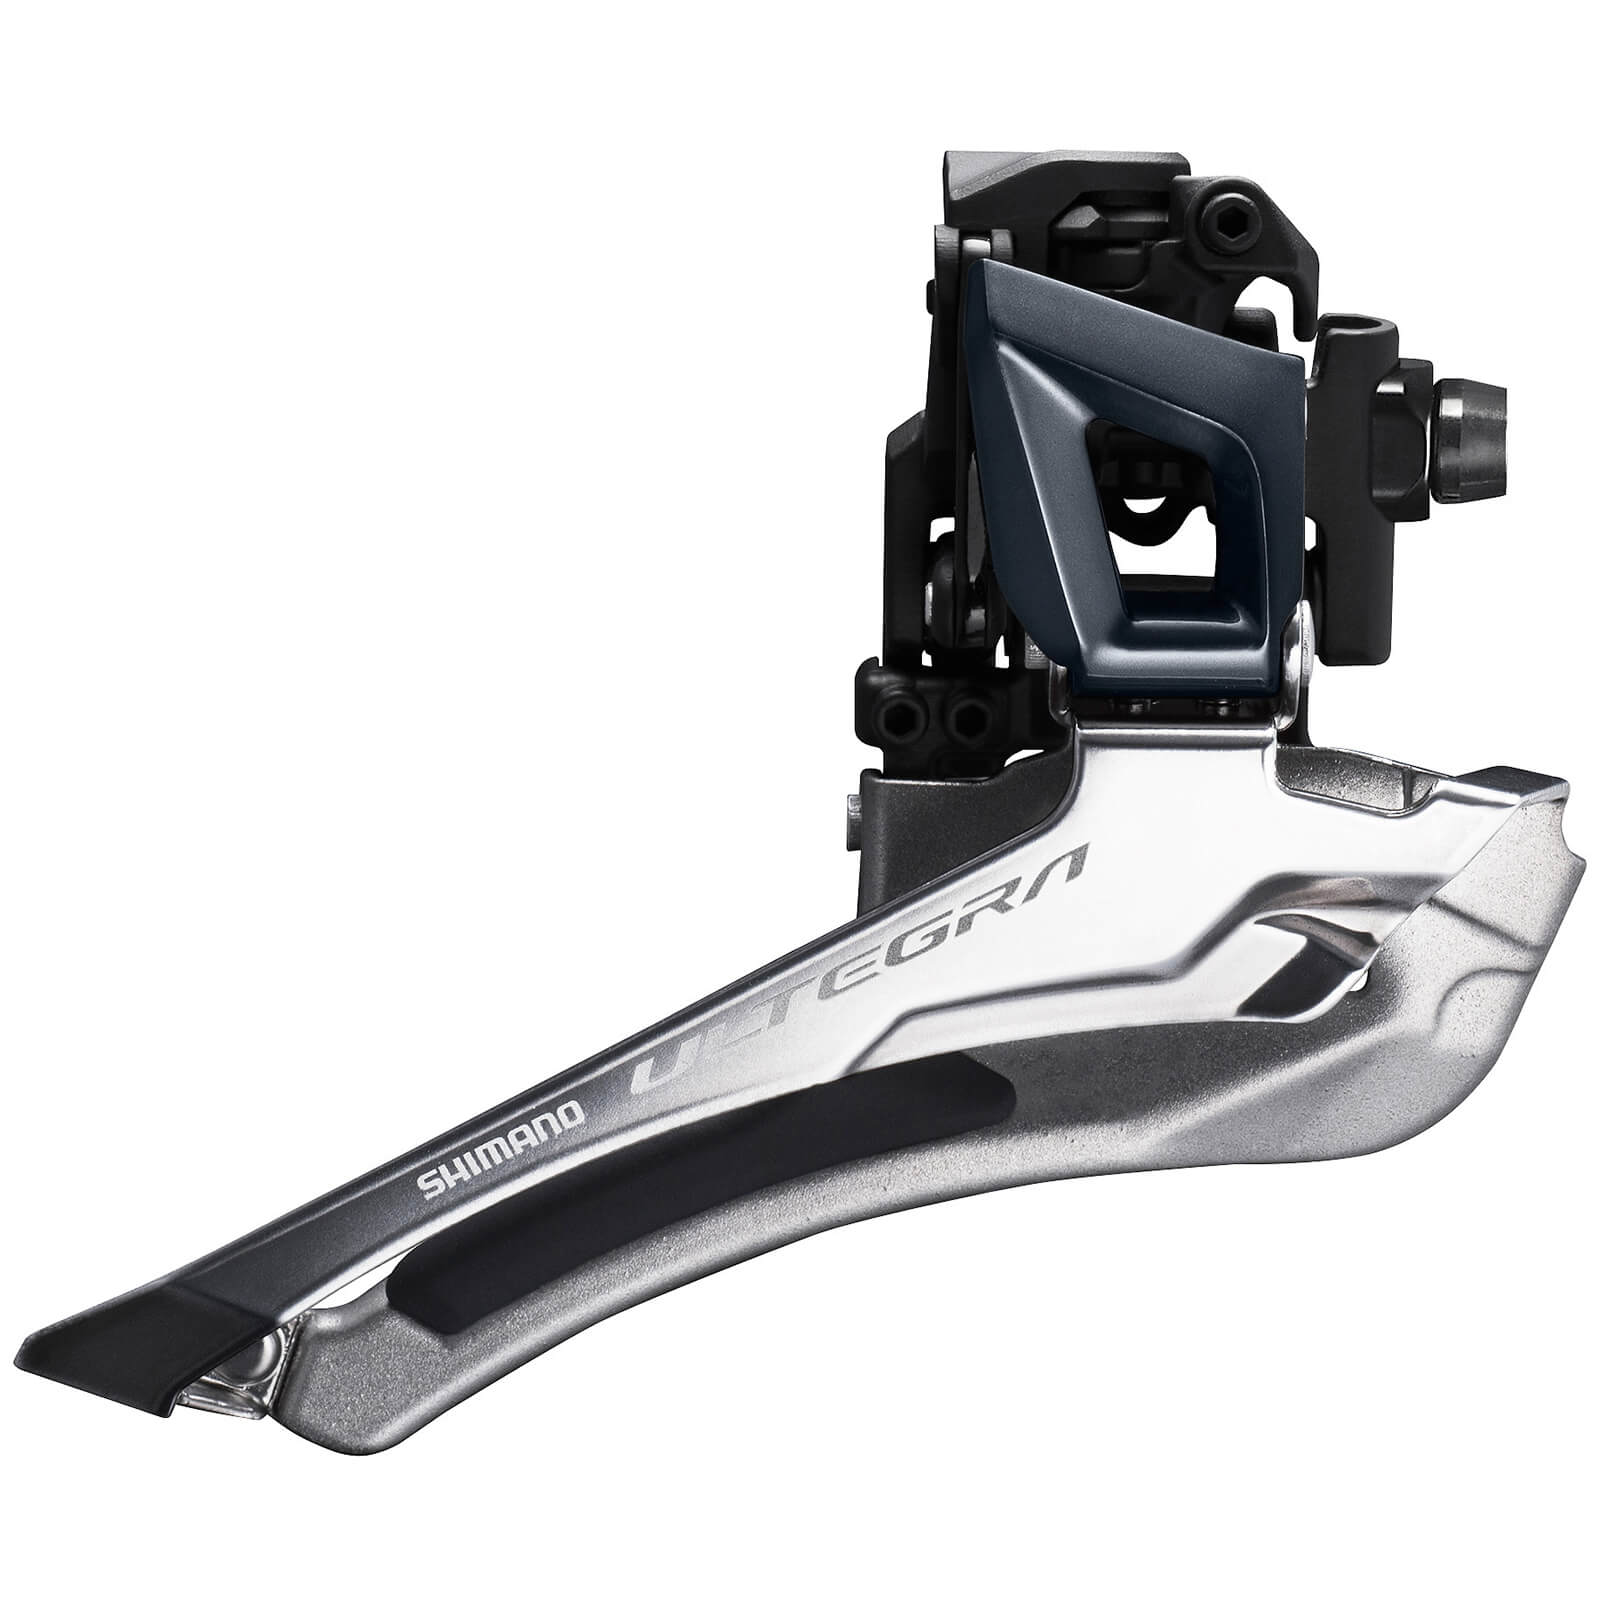 Shimano Ultegra R8000 Band-On Front Derailleur - 34.9mm